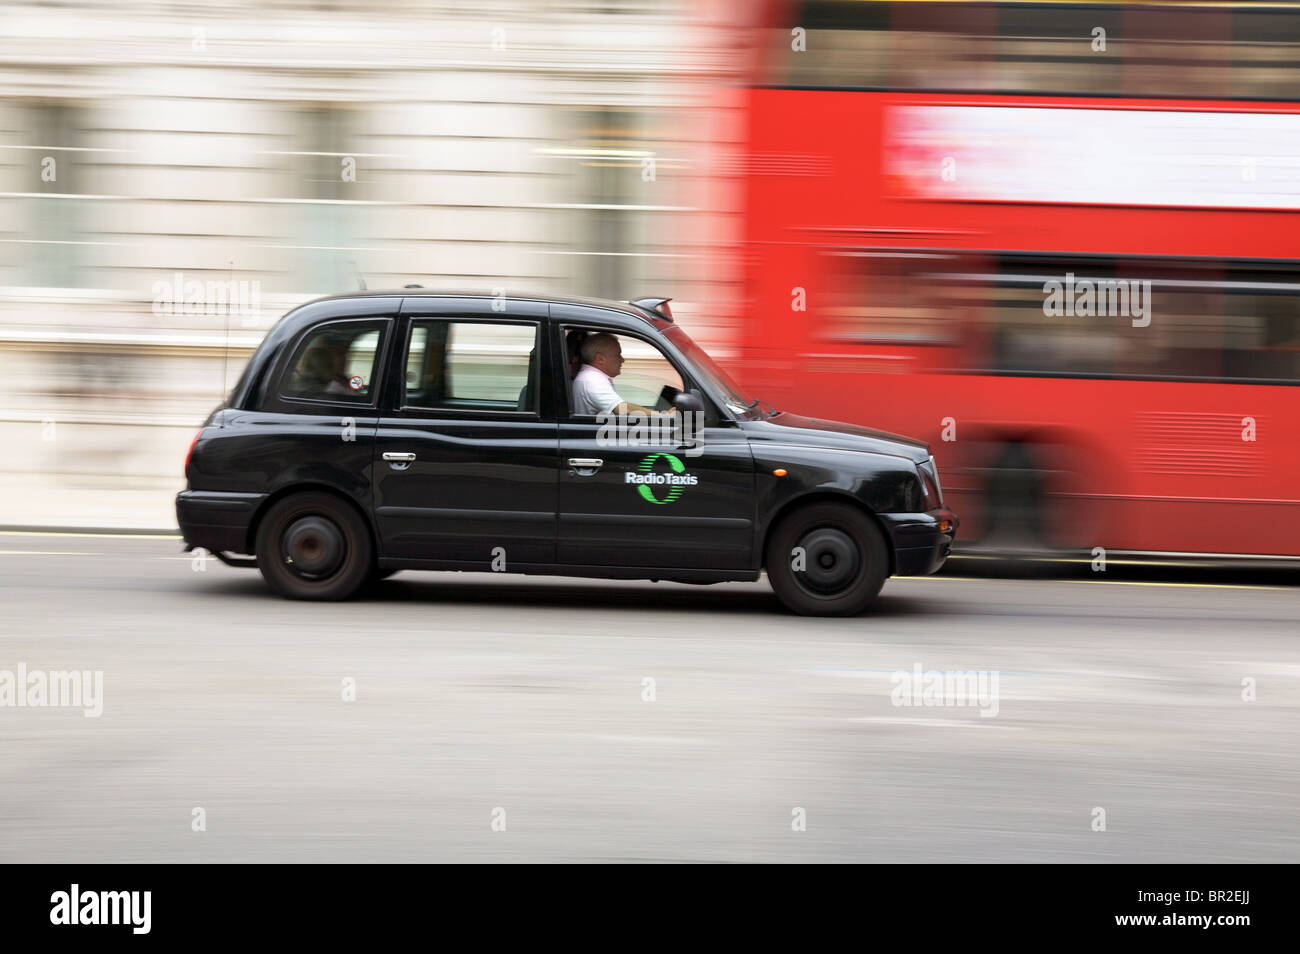 London taxi passing a bus Stock Photo